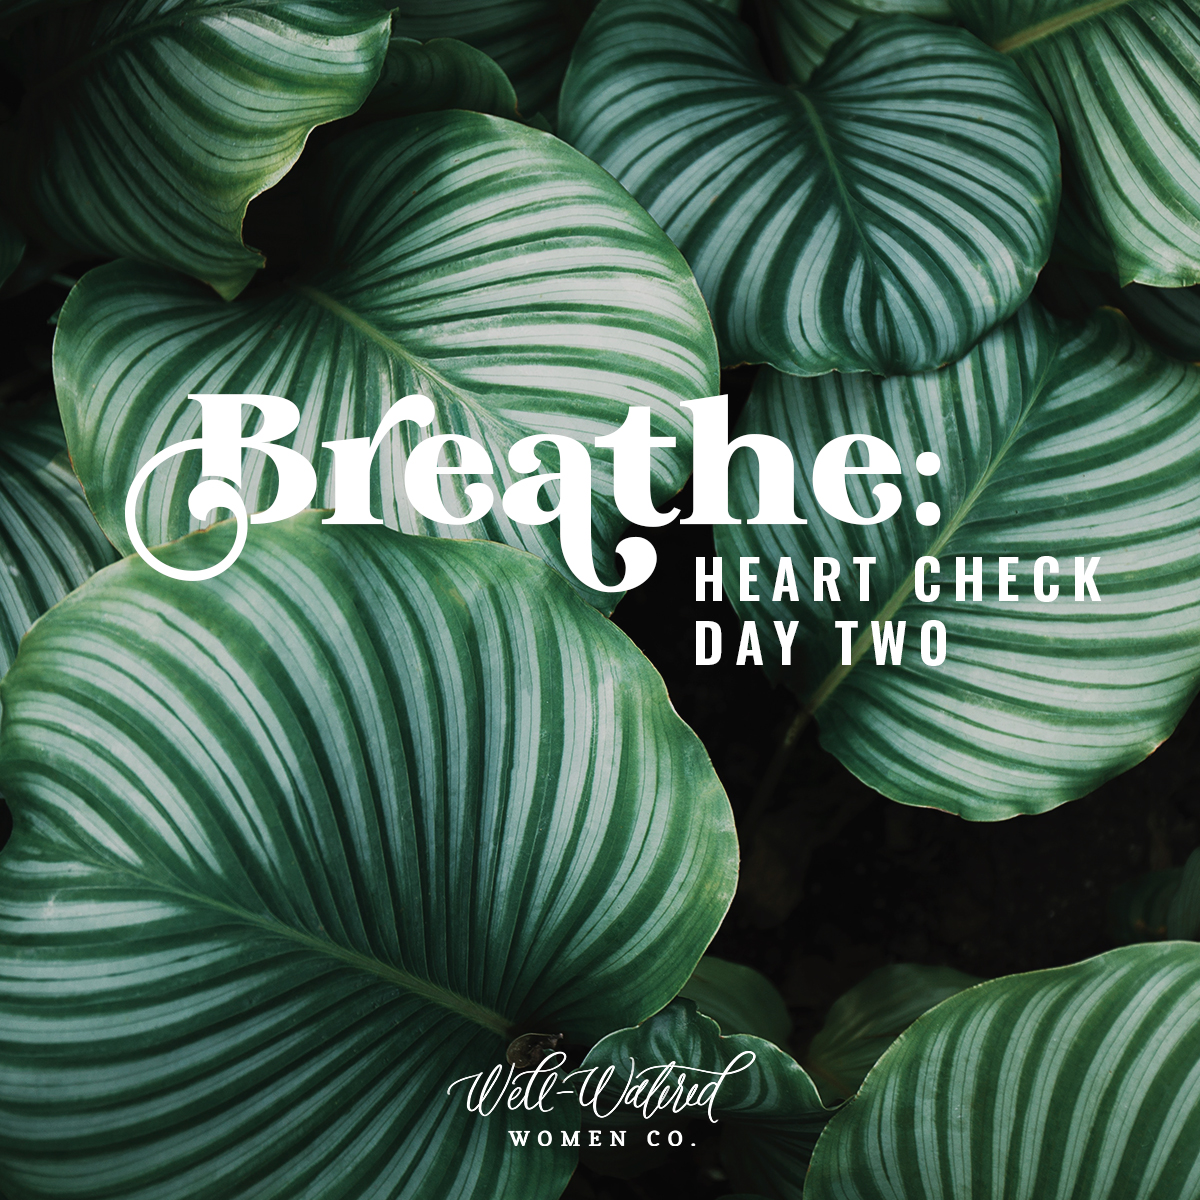 Well-Watered Women-Blog-Breathe-Heart Check, Day Two